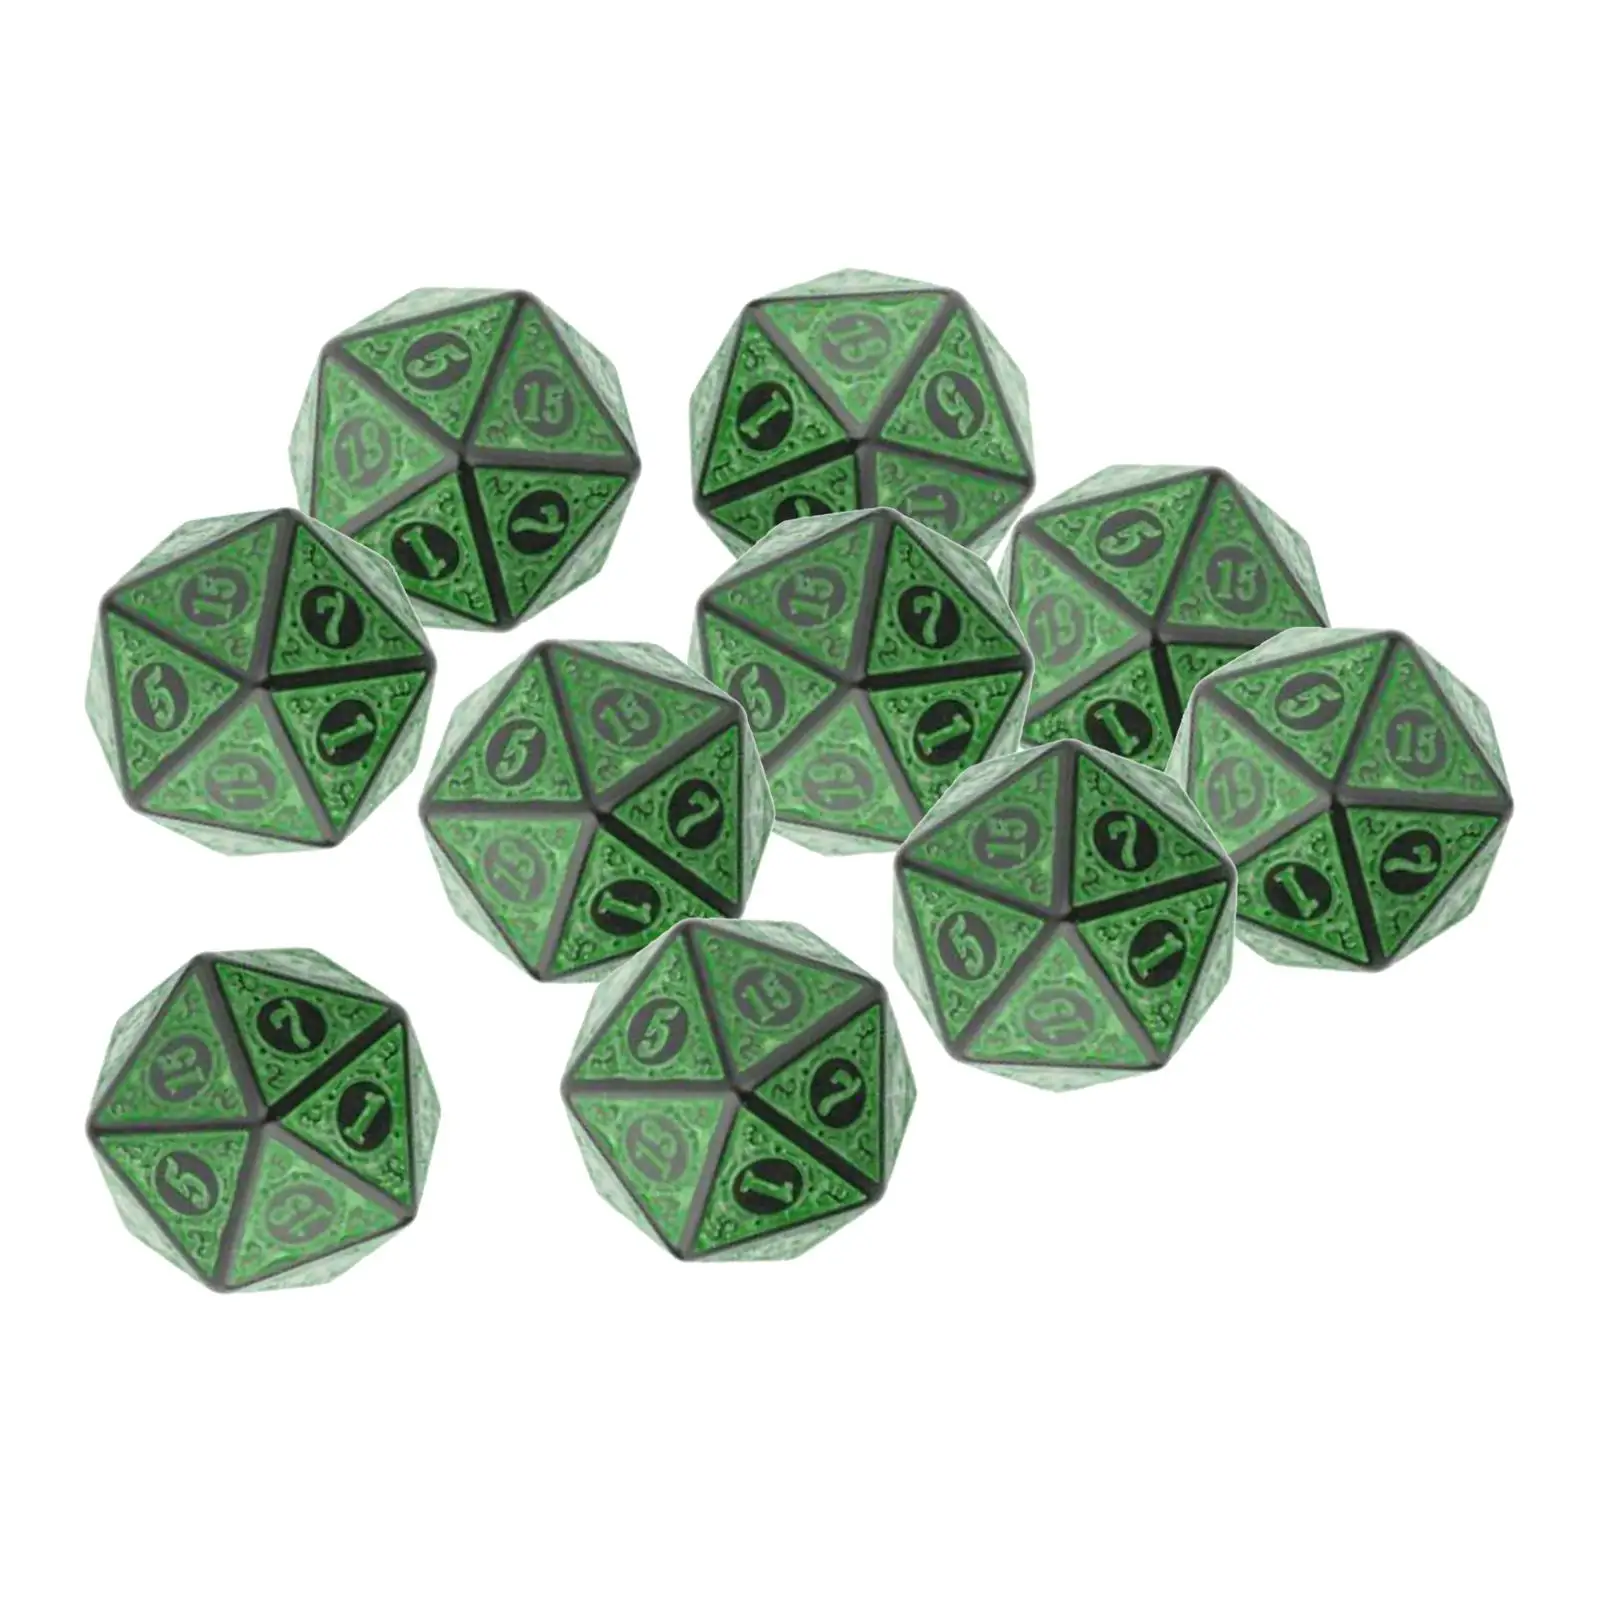 Dice Set 10Pcs Lightweight Wear Resistant Portable for RPG Teaching Toy Gift DND Party